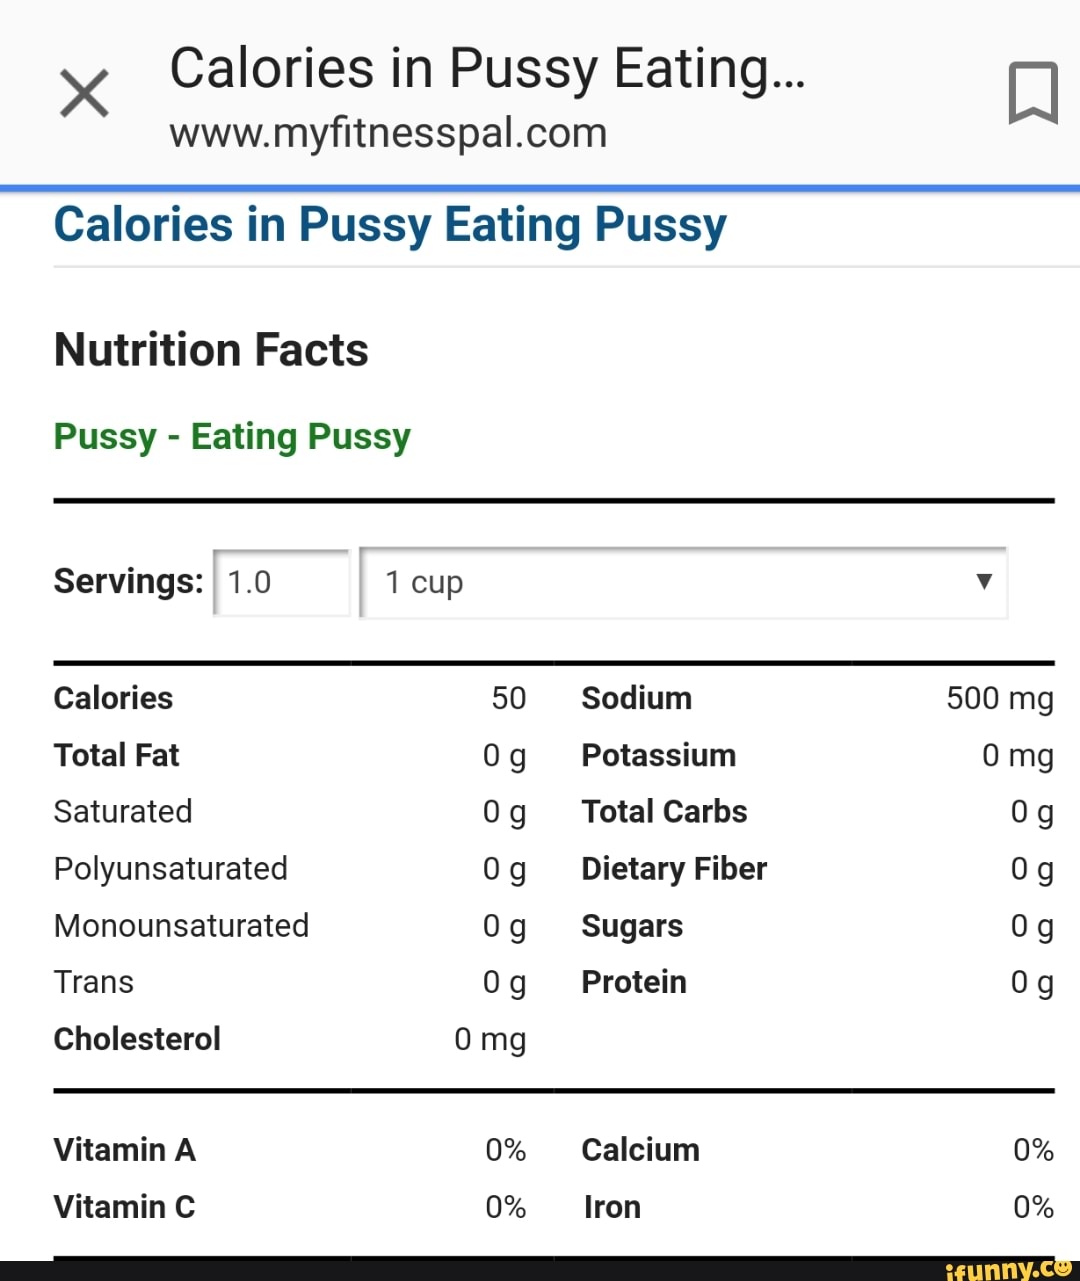 X Calories in Pussy Eating... www.myﬁtnesspaI.com Calories in Pussy Eating Puss...